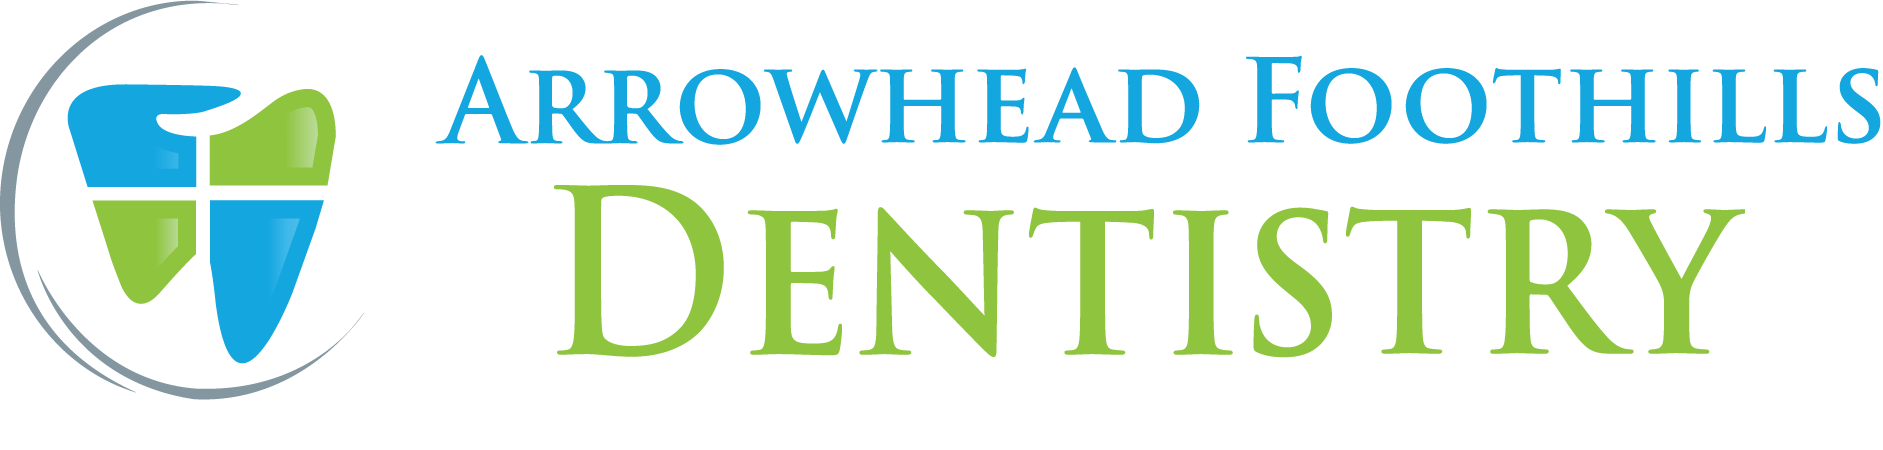 Arrowhead-Foothills-Dentistry-Victor-Moreira.png